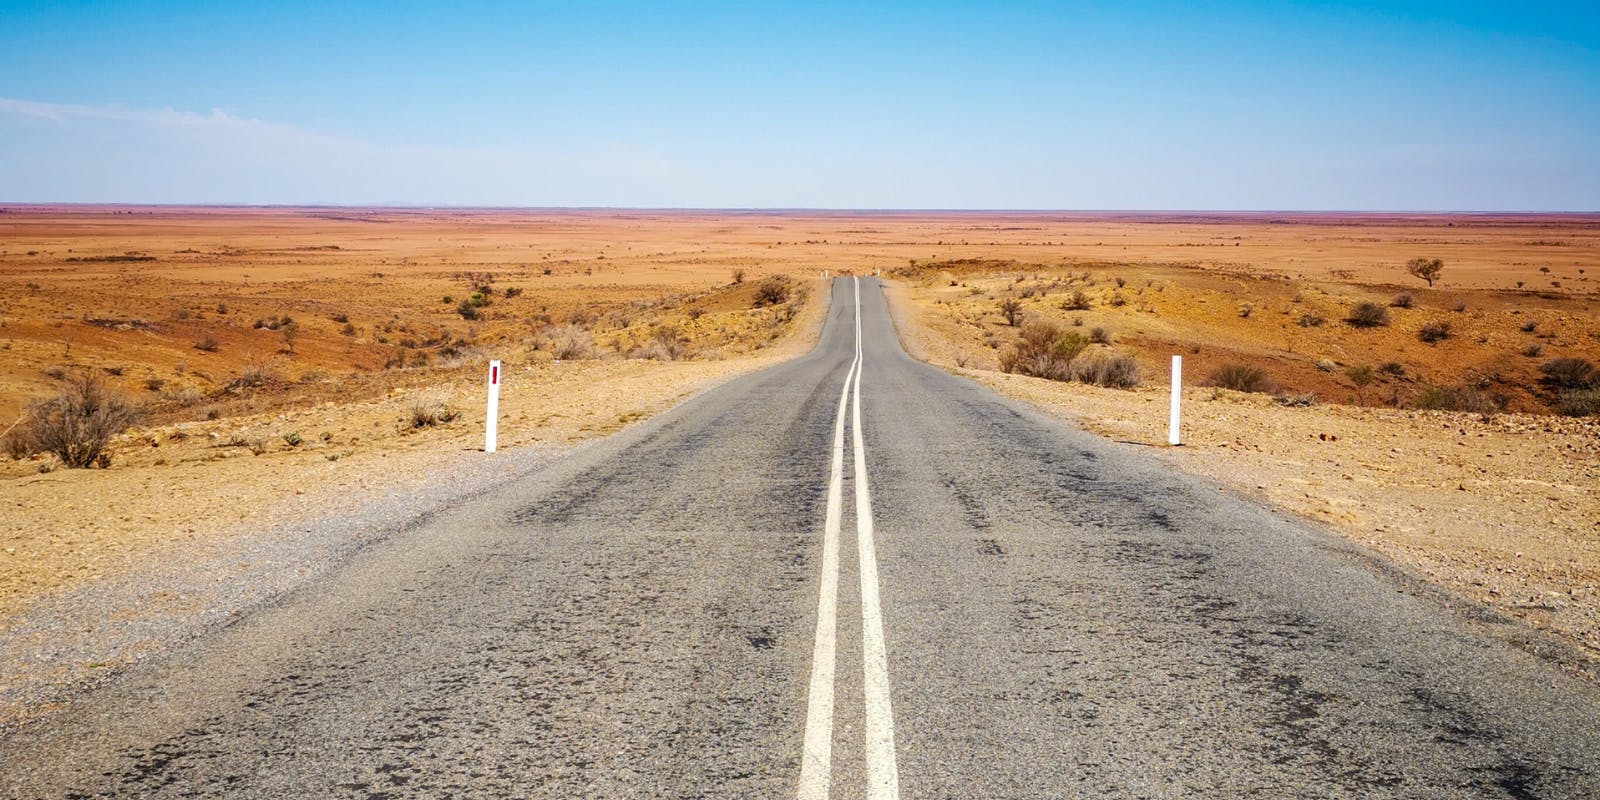 Why the Australian outback makes a perfect setting for crime novels